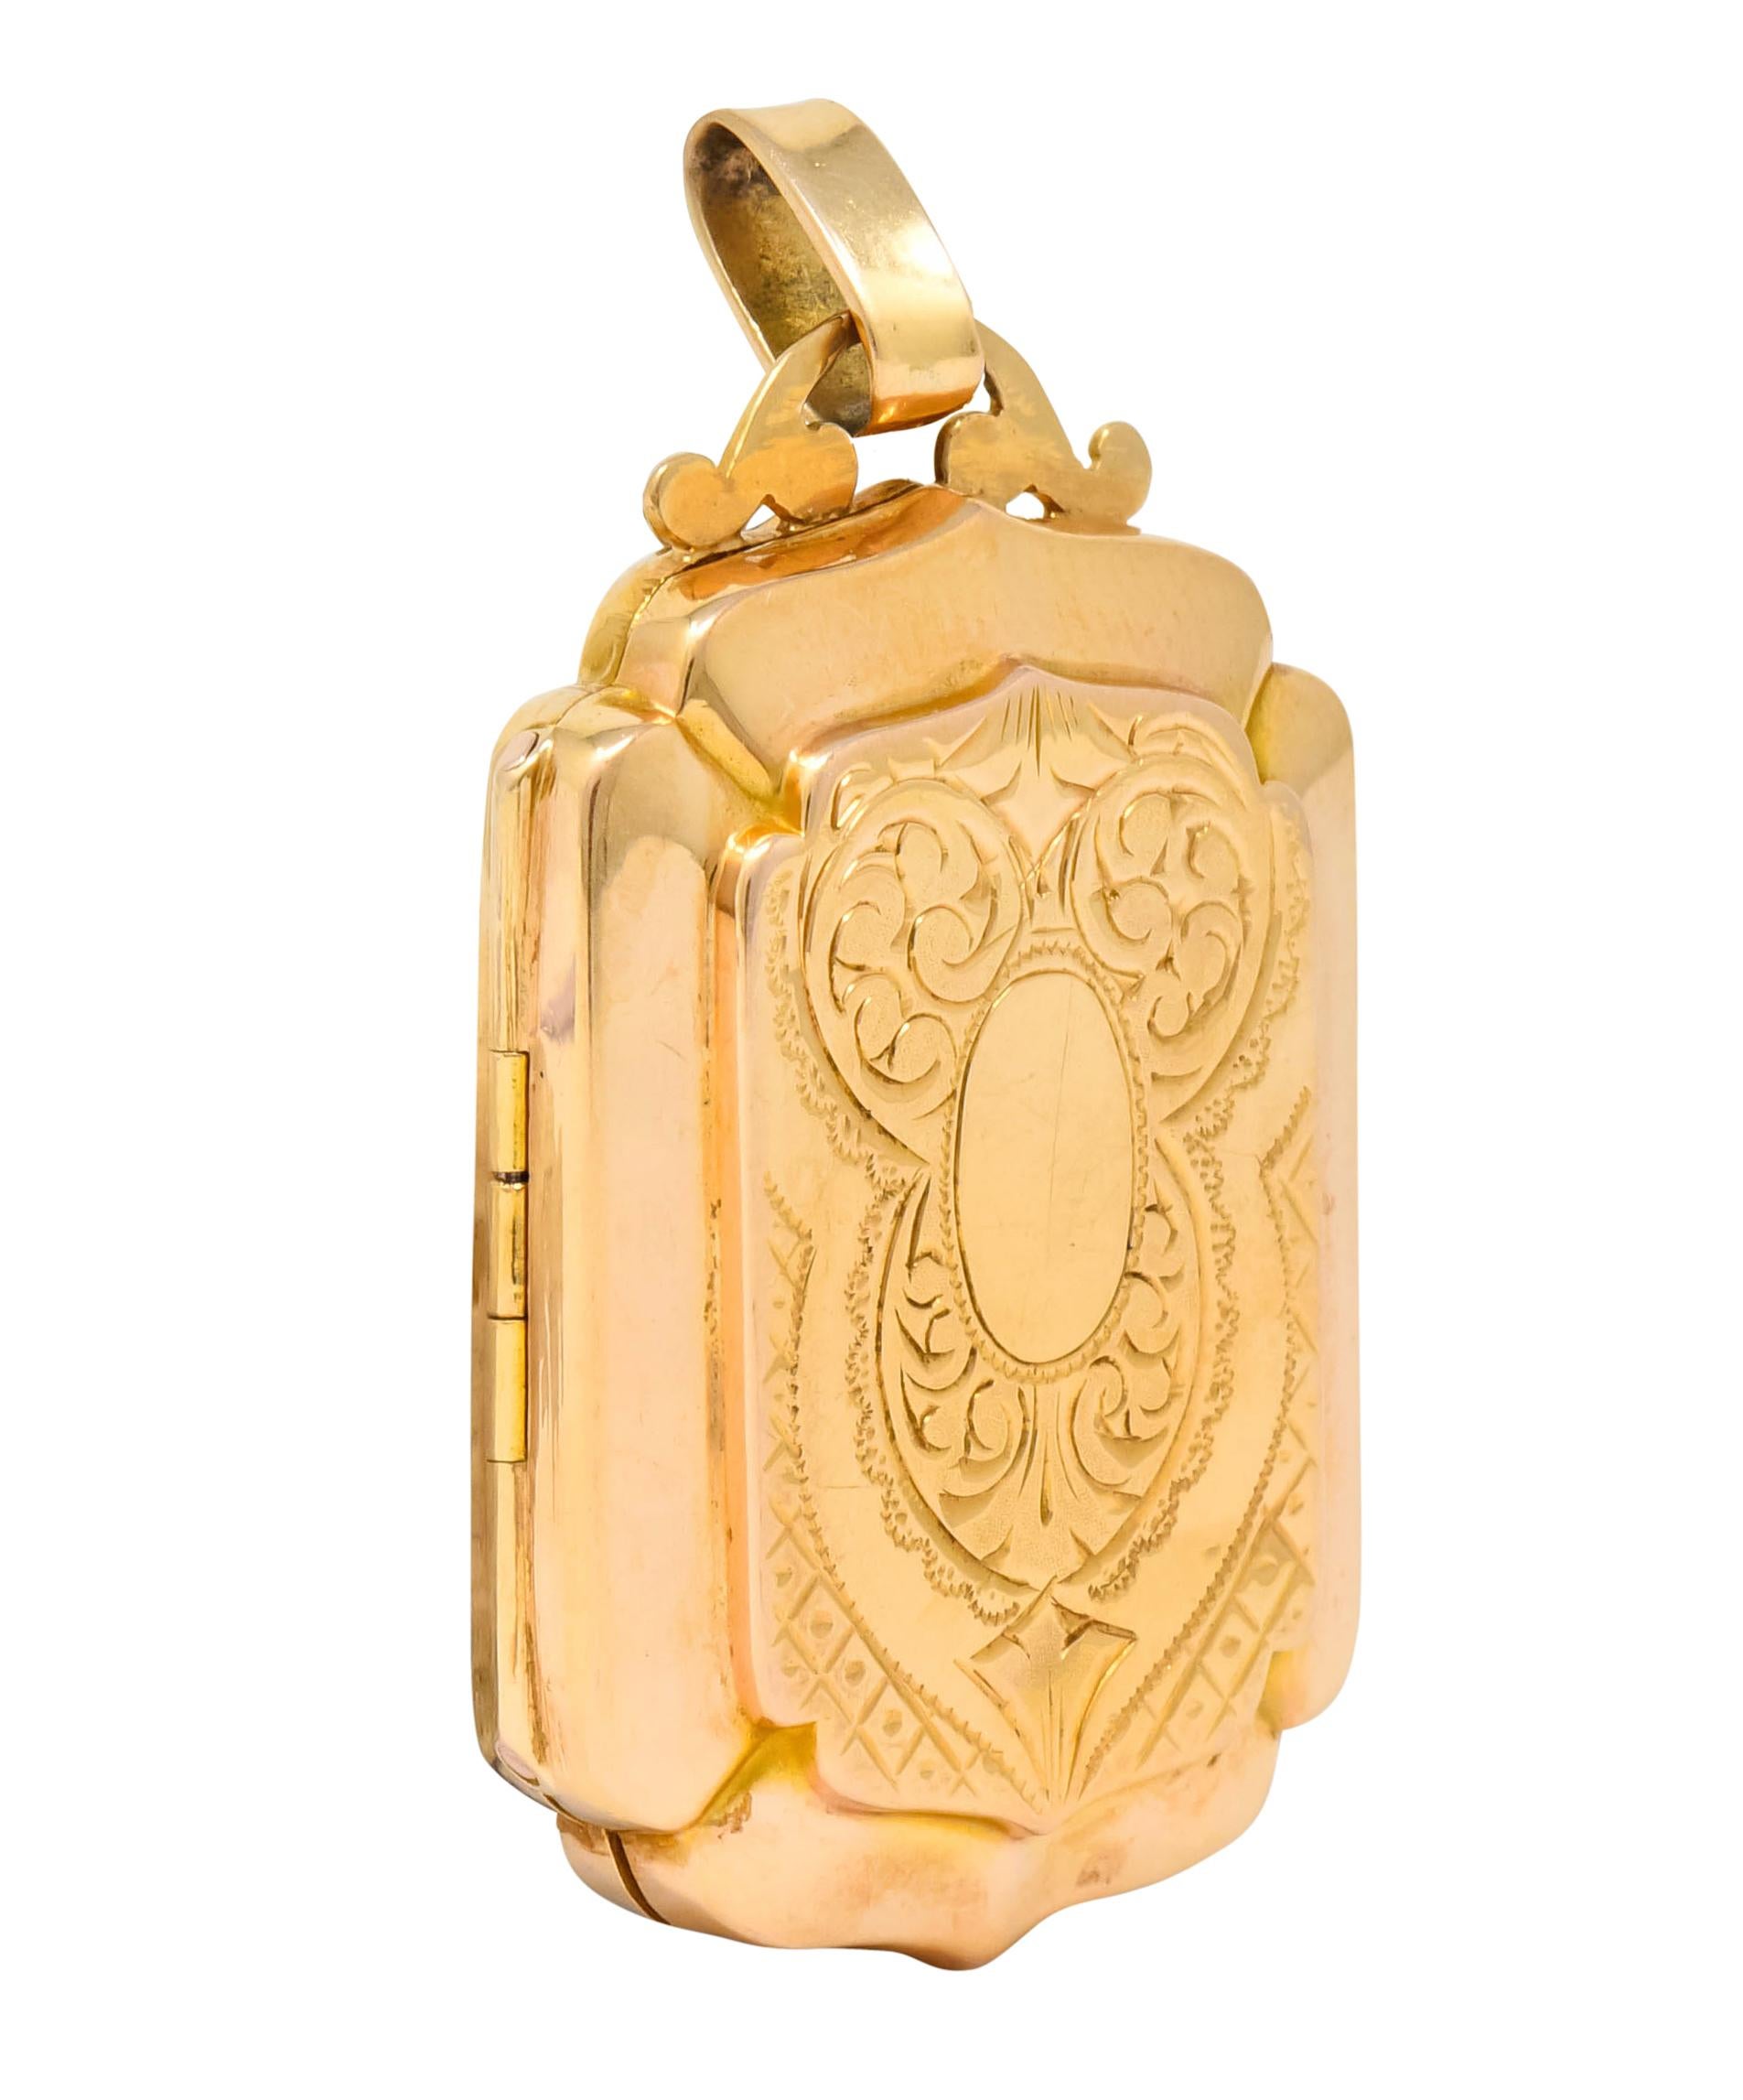 Pendant designed as an ornate rectangular locket with a scrolled detail for oval bale

Front deeply engraved with scrolled lace motif while back is deeply engraved with dotted floral motif with zig-zagged frame

Opens on a hinge to reveal two